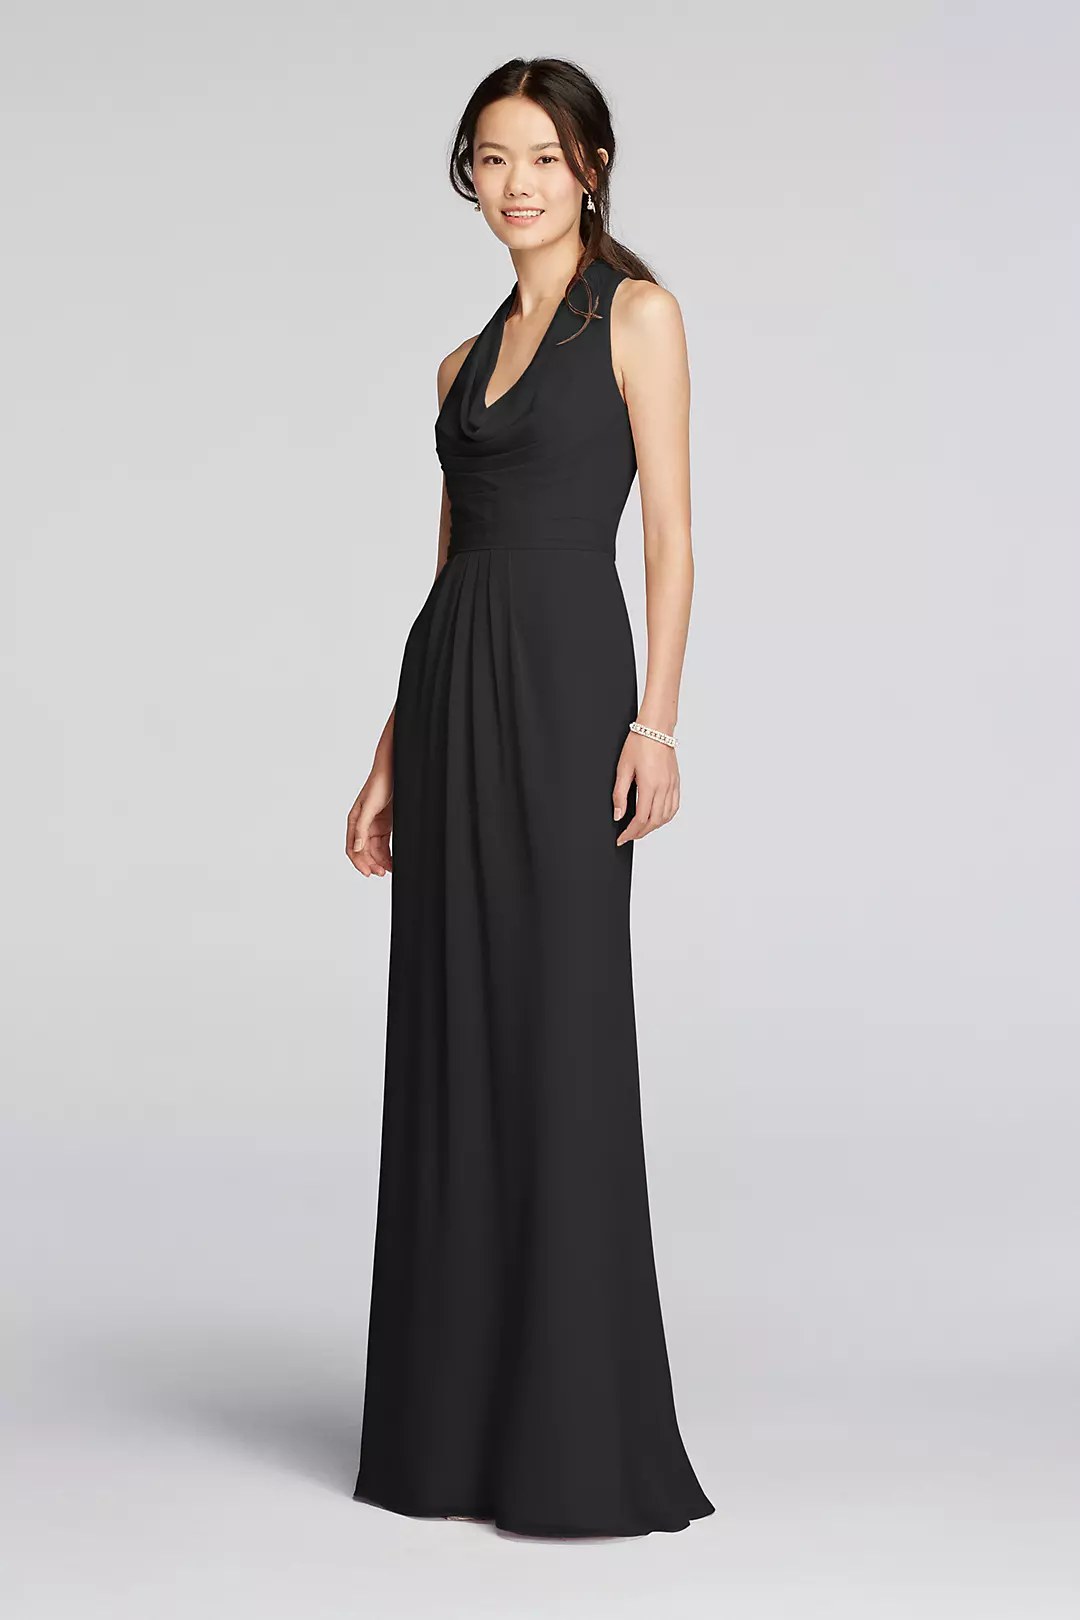 Long Chiffon Dress with Front Cowl Neckline Image